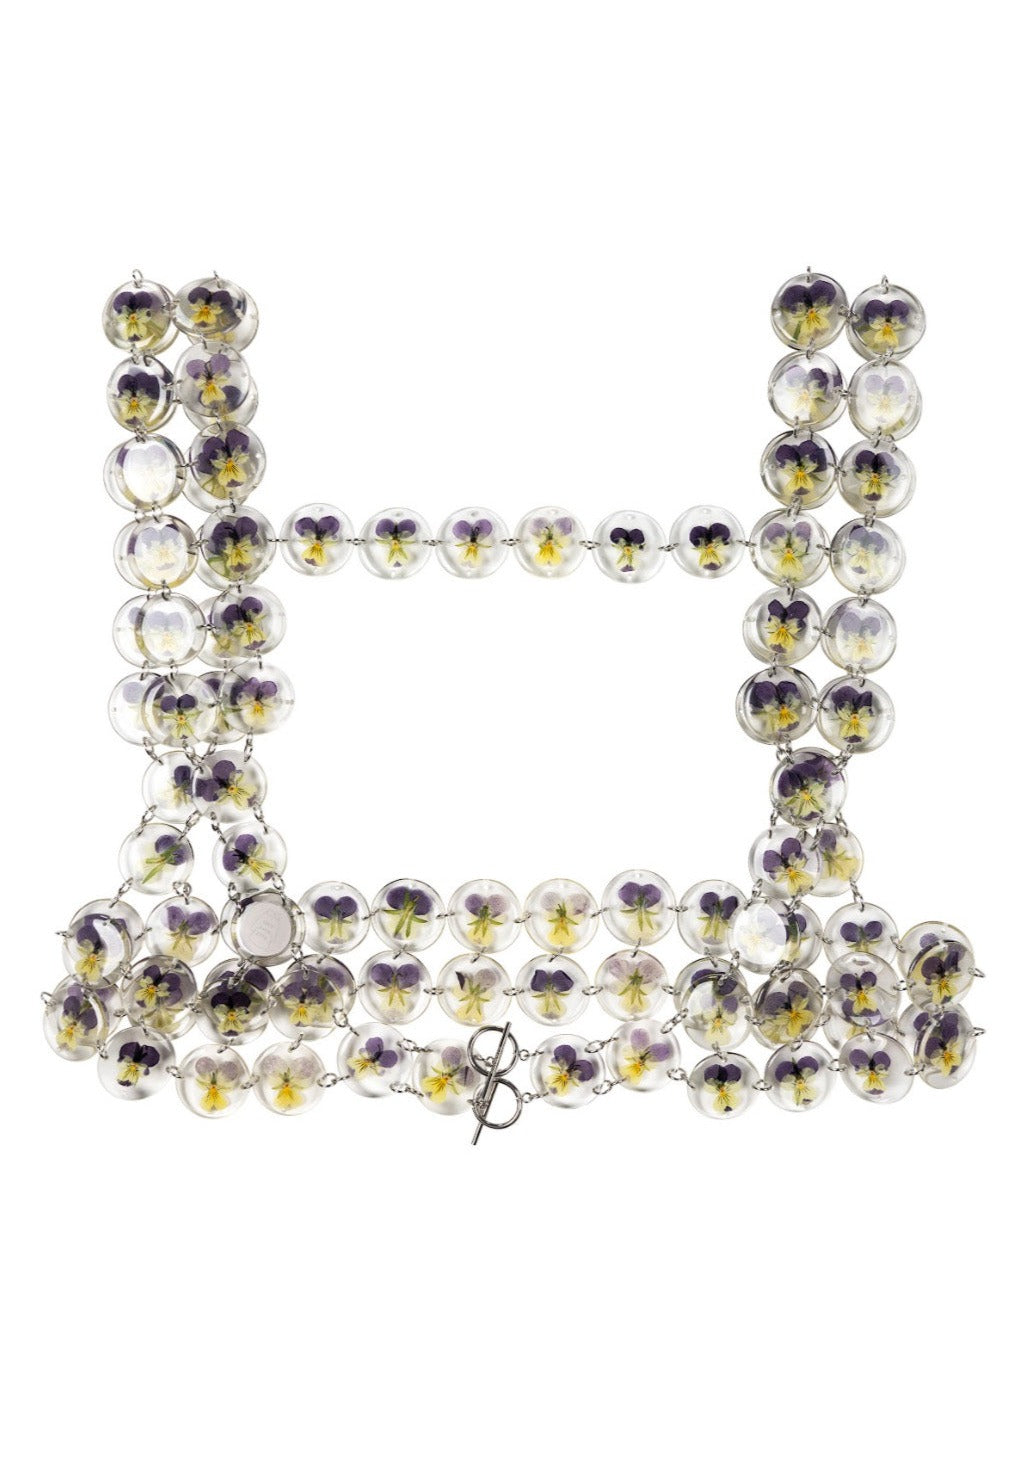 Chainmaille harness made of purple and yellow pansy flowers preserved in round resin charms connected by silver jump rings.